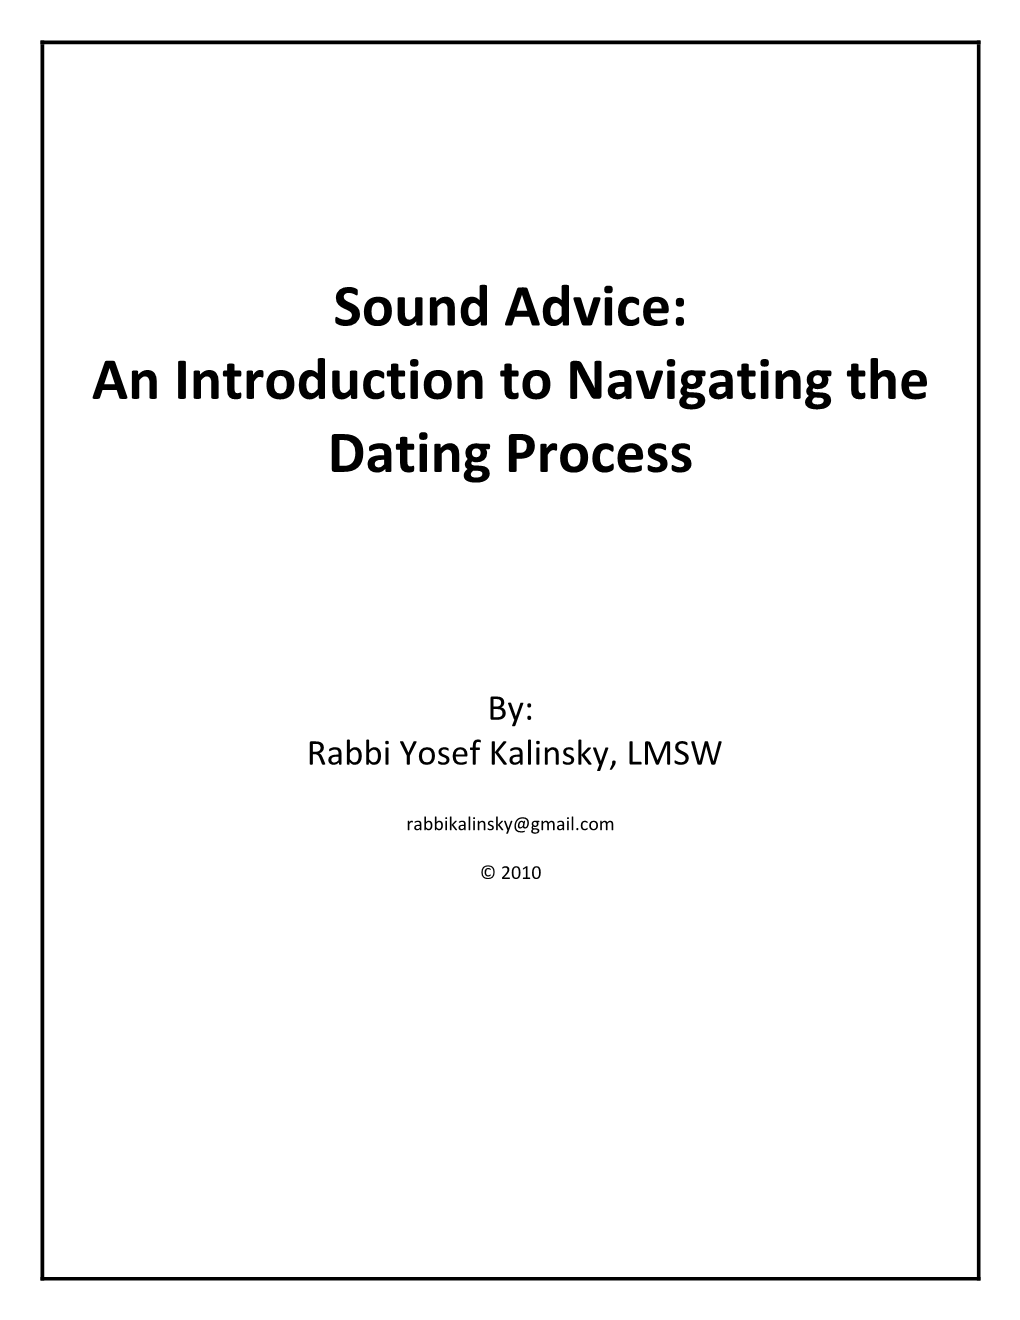 An Introduction to Navigating the Dating Process